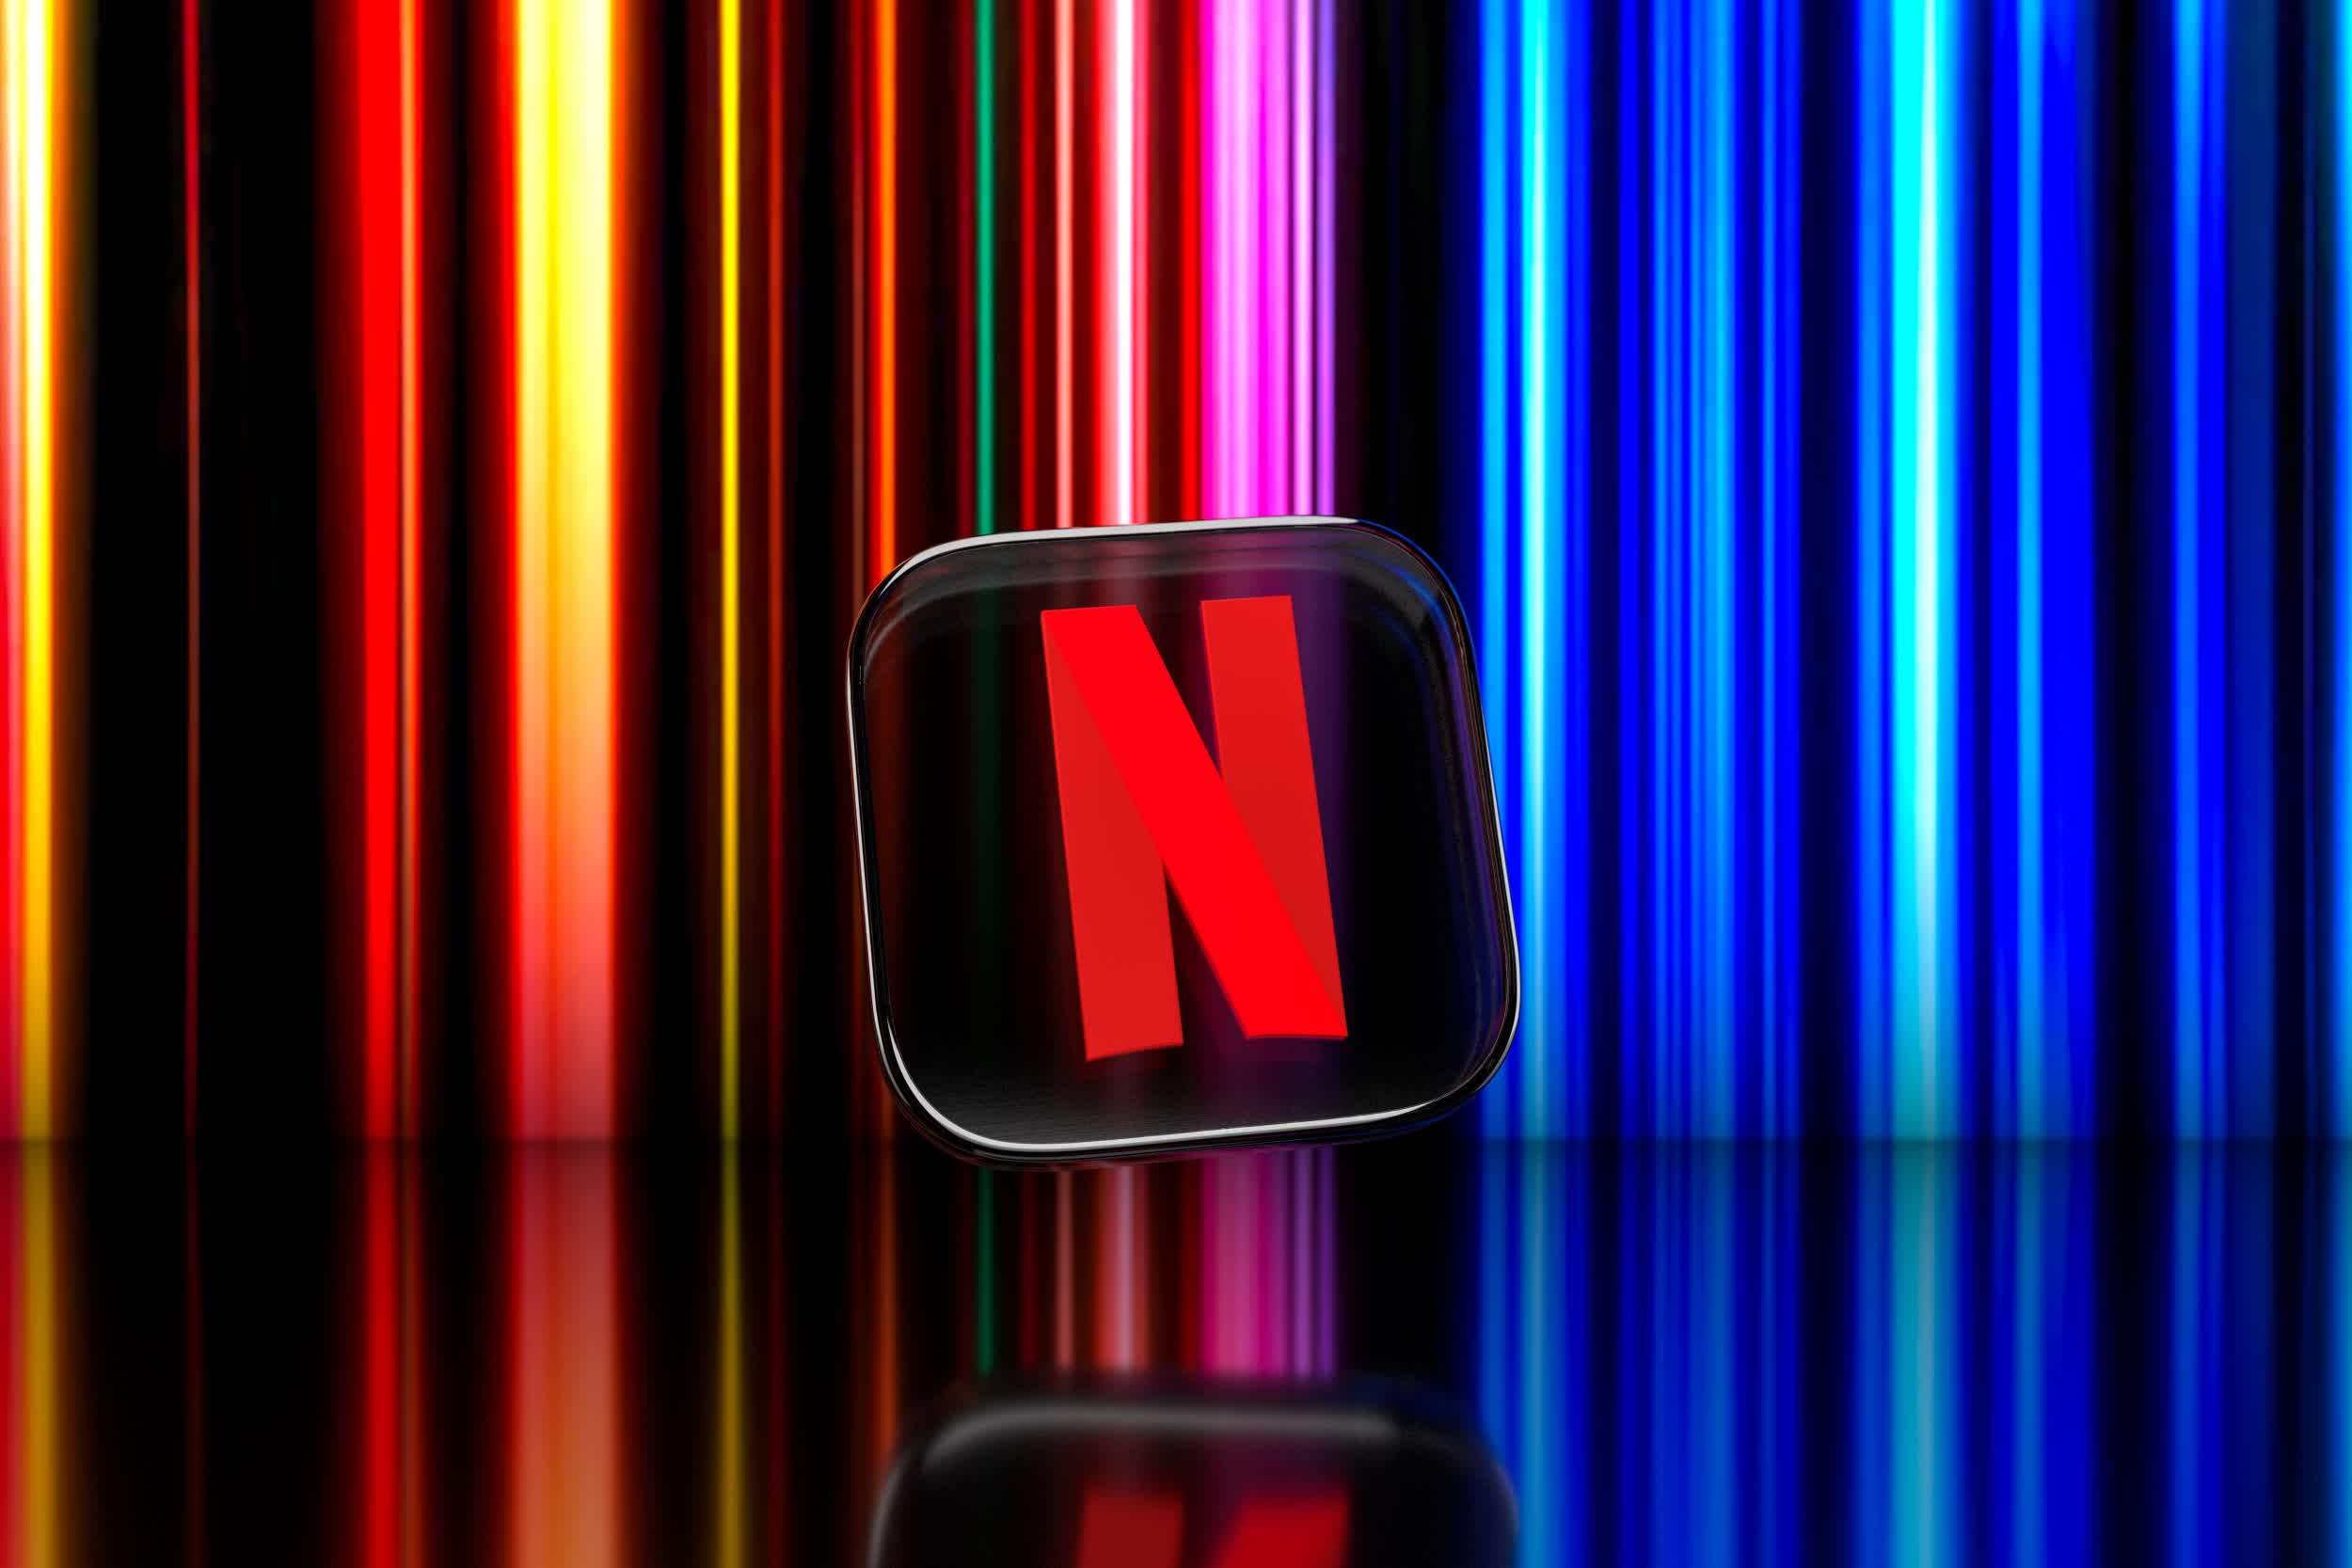 Netflix popularized binge watching, but is it time to move on?